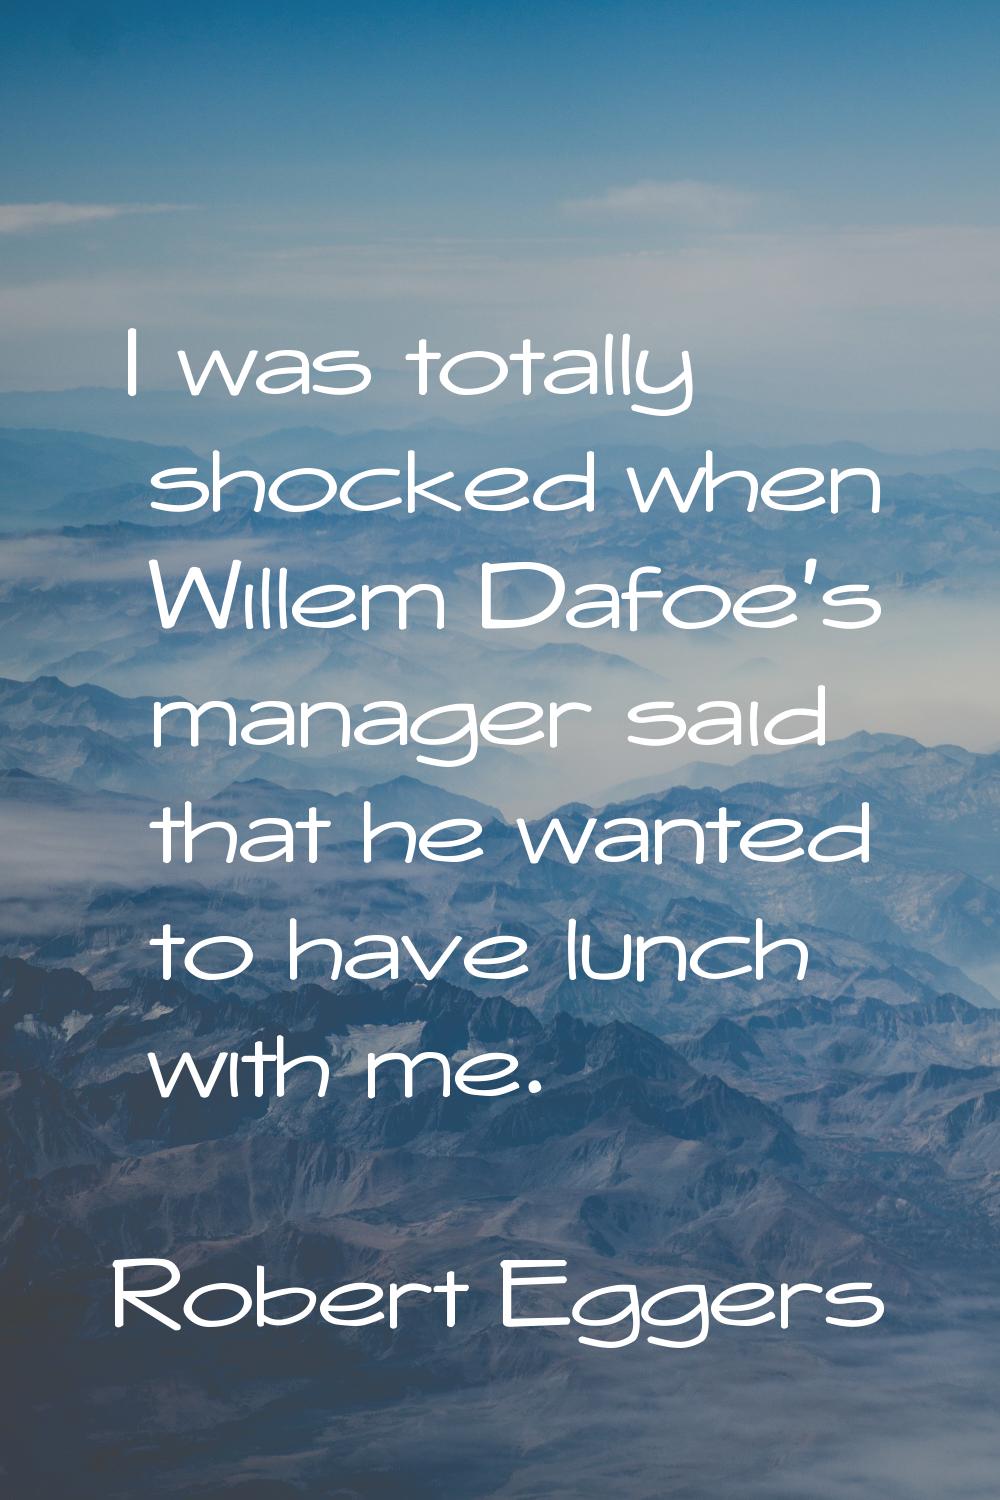 I was totally shocked when Willem Dafoe's manager said that he wanted to have lunch with me.